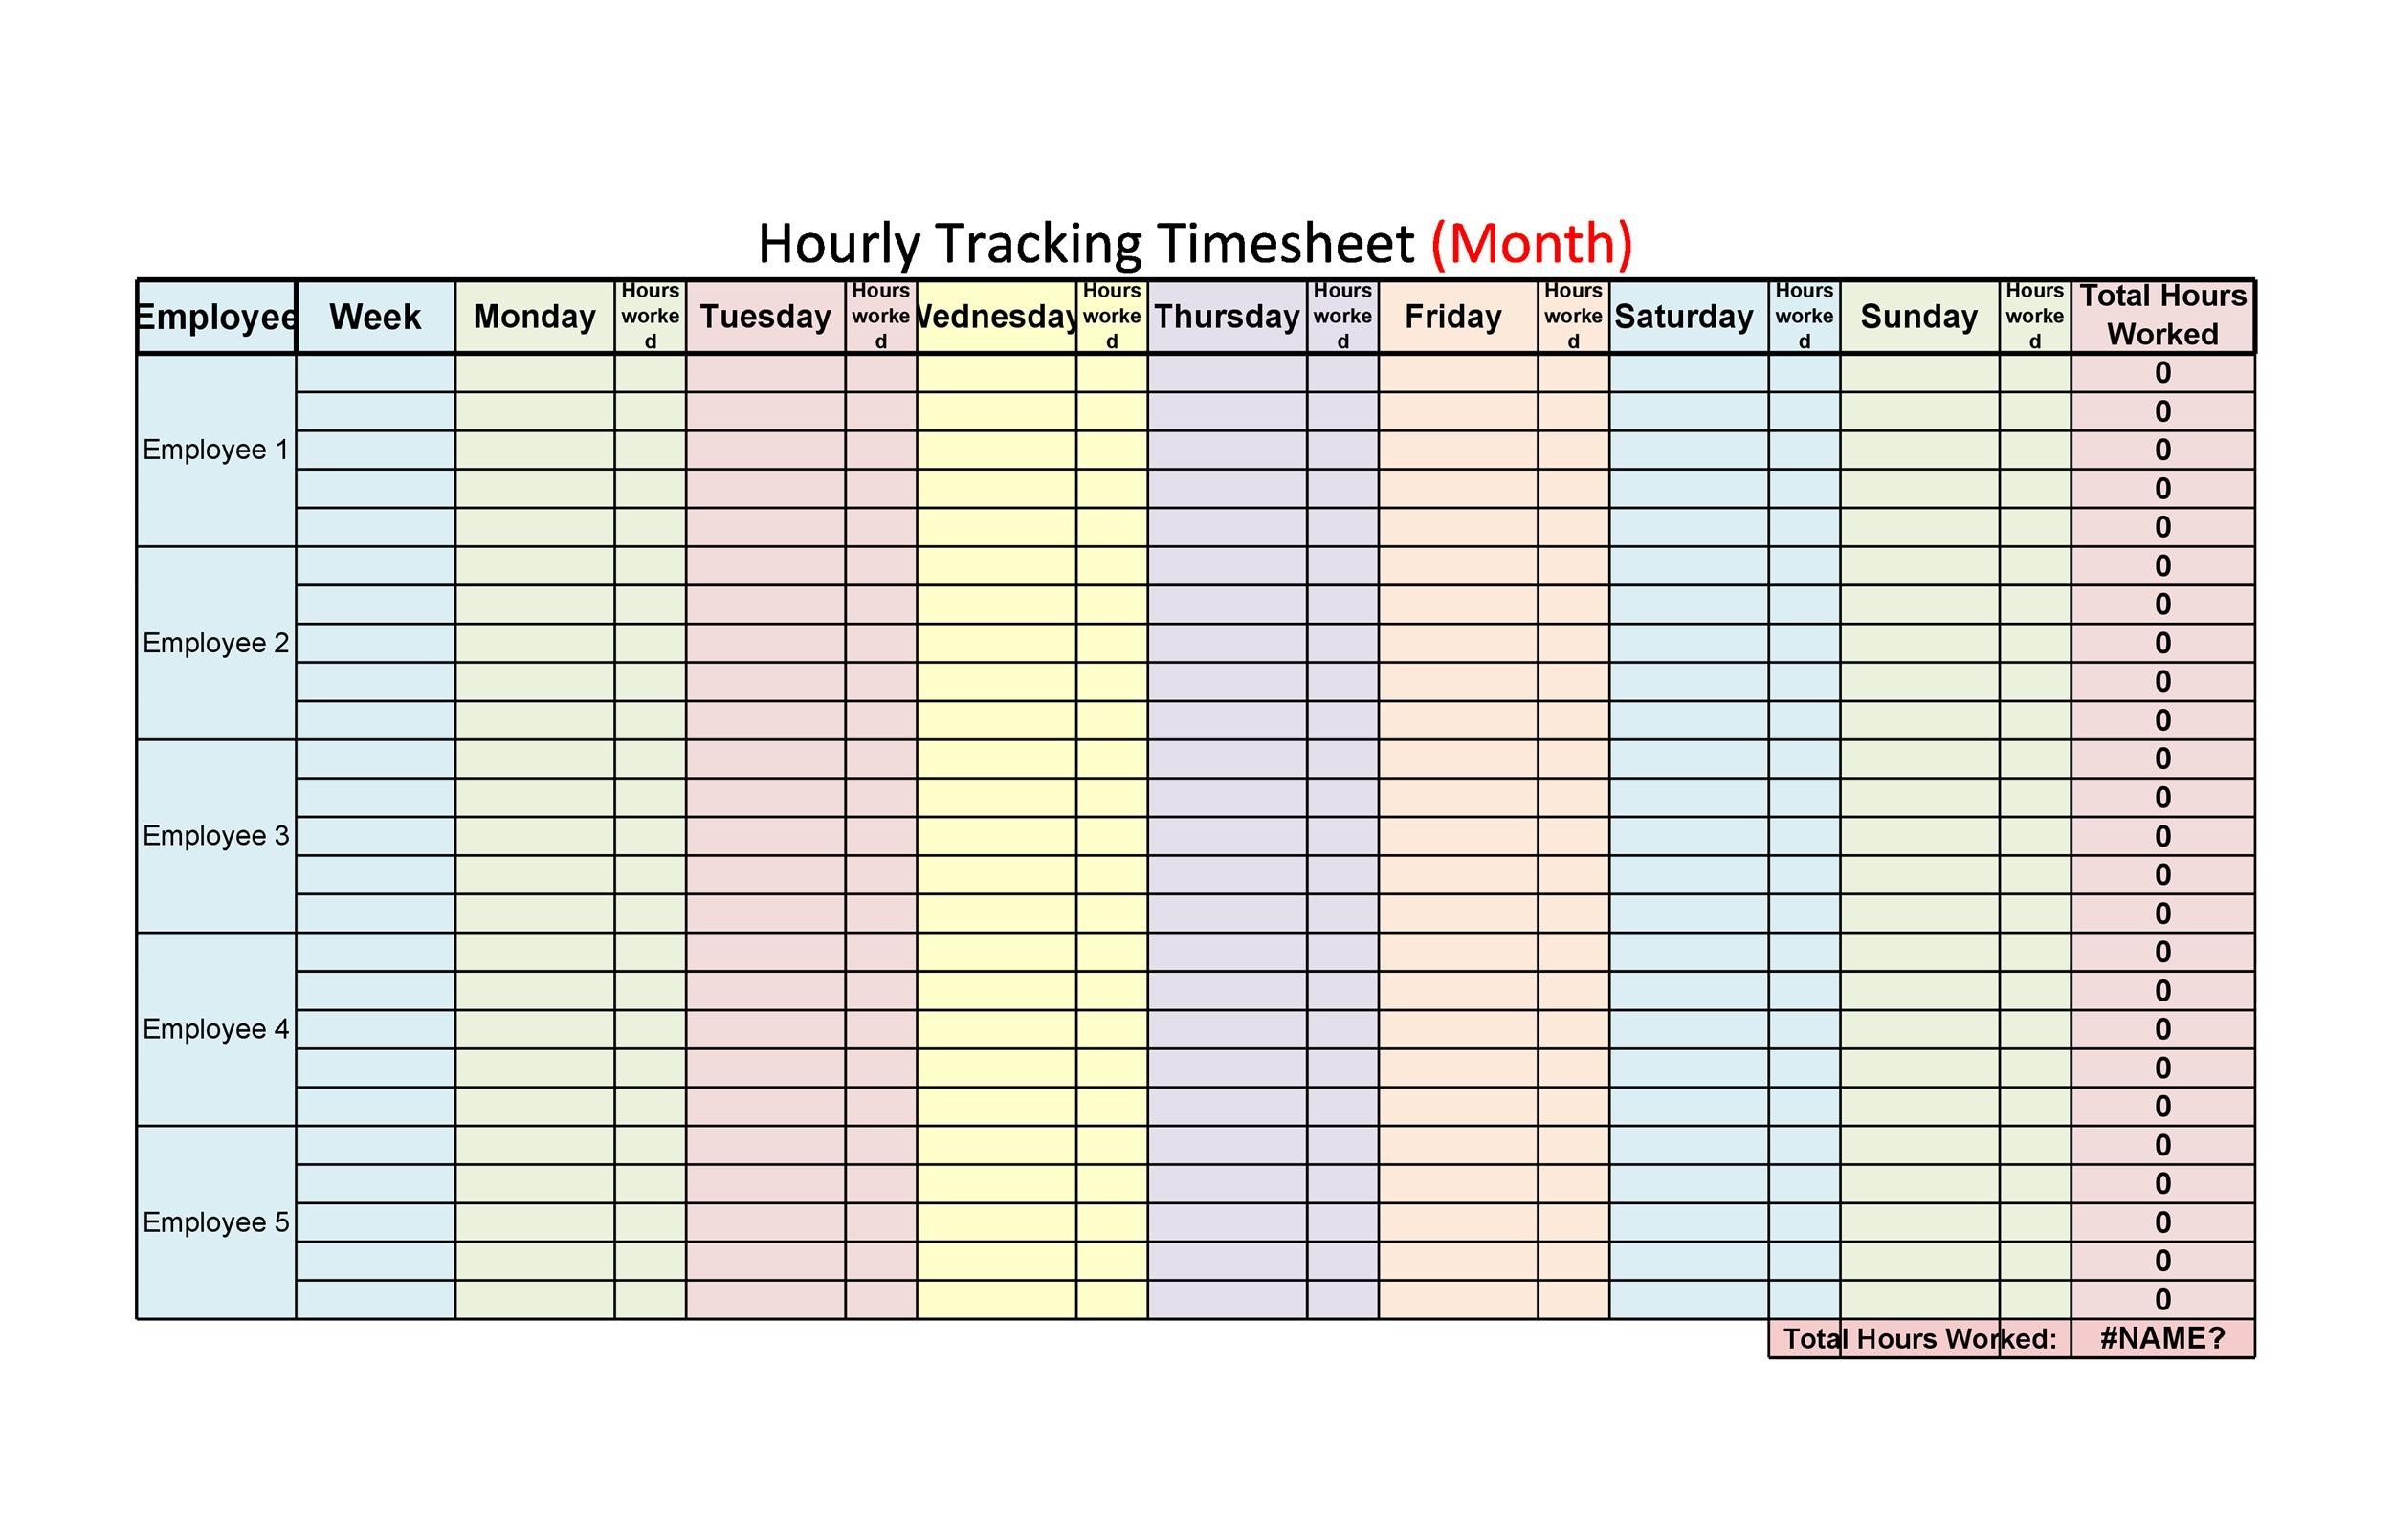 43 Effective Hourly Schedule Templates (Excel & MS Word) ᐅ TemplateLab